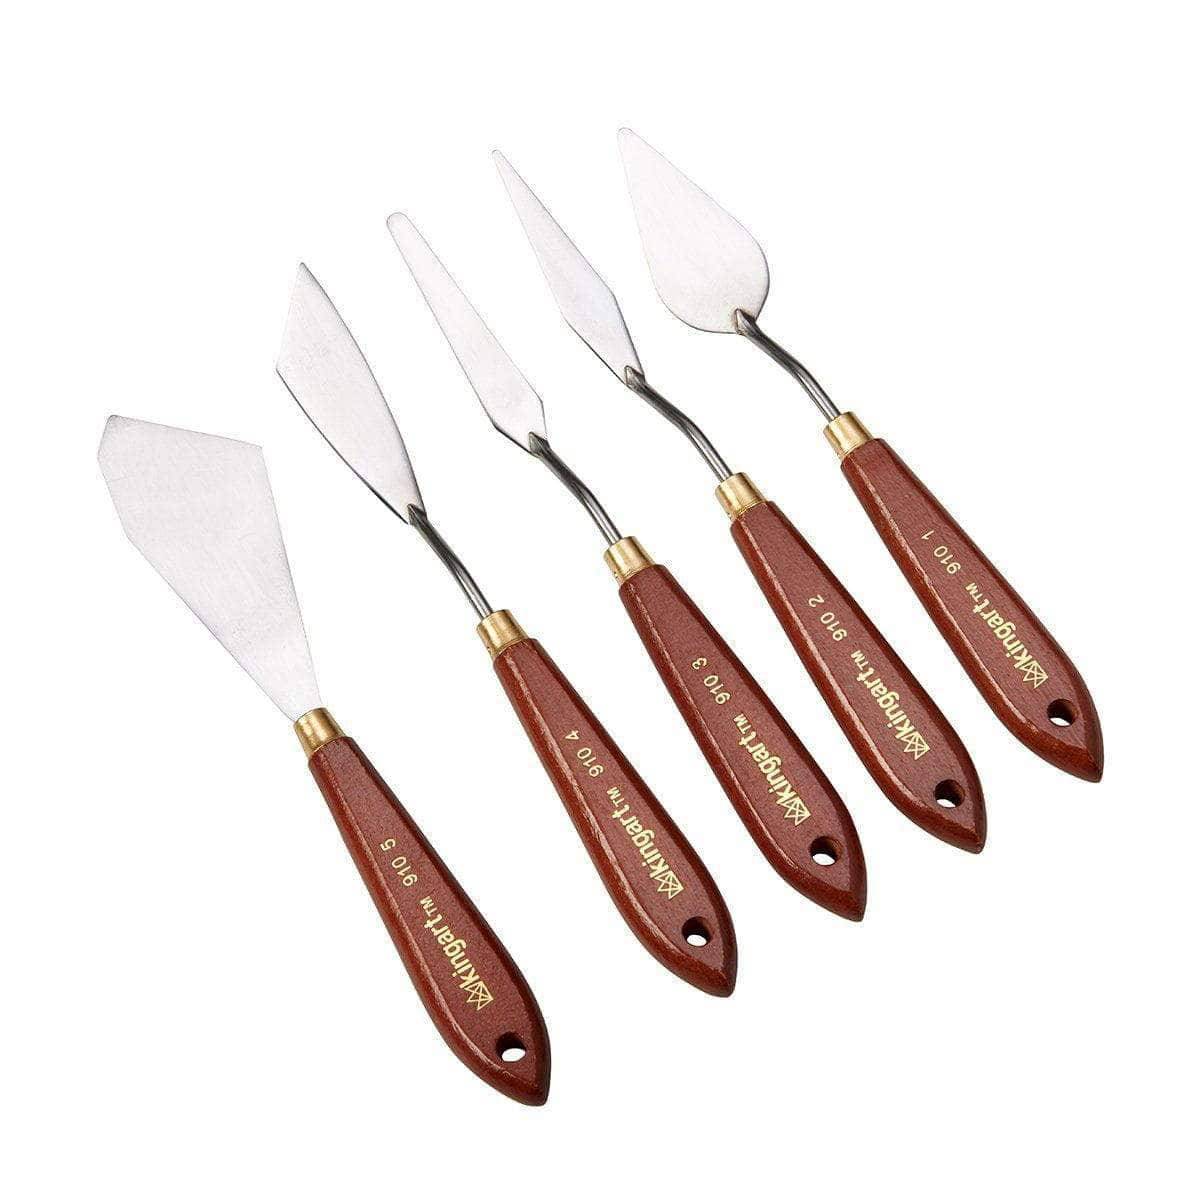 Palette Knives in Art Painting Supplies 